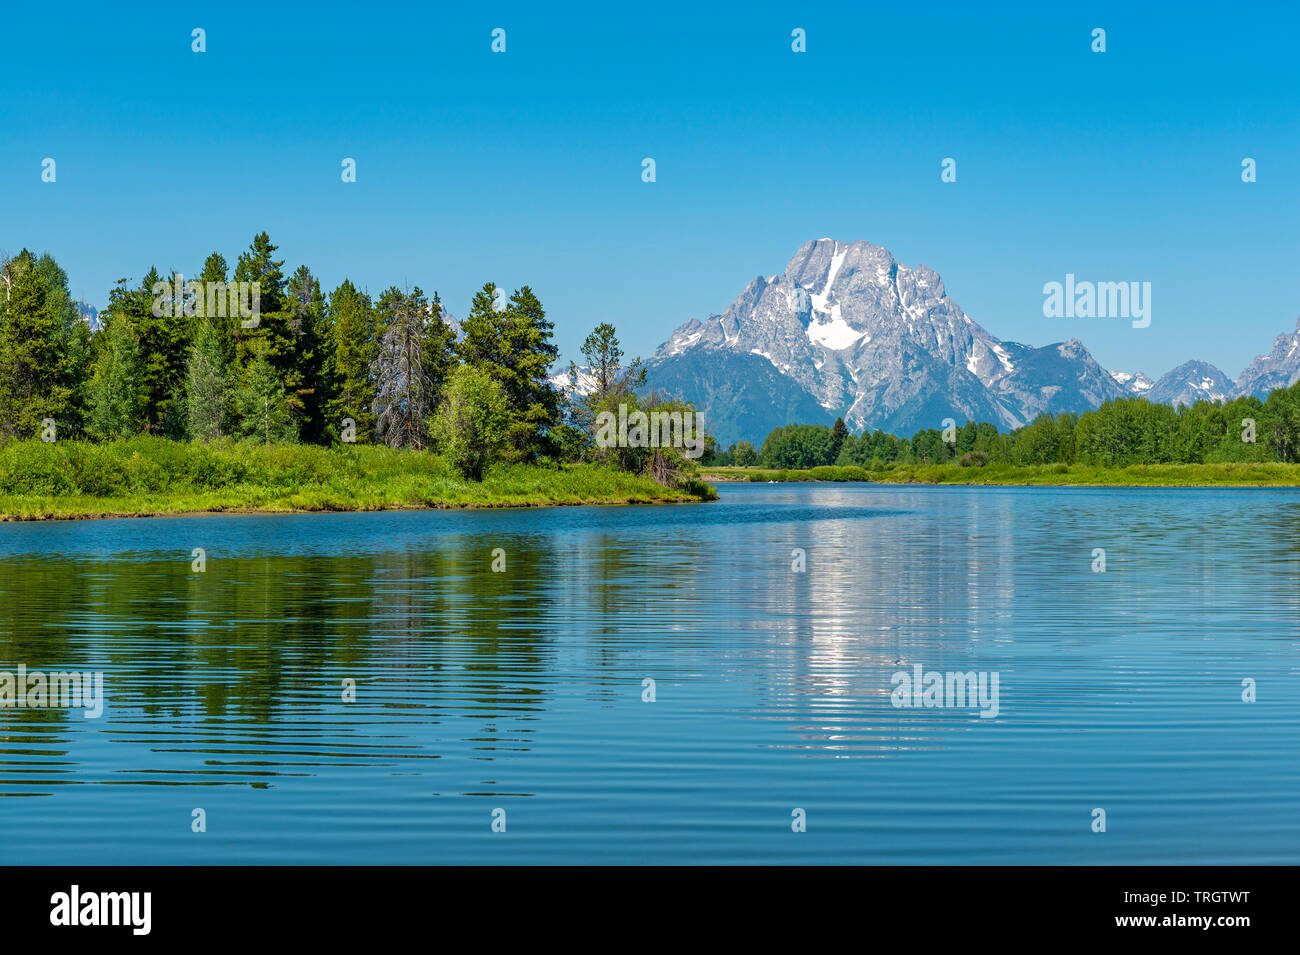 The majestic peaks of the Grand Tetons with a reflection in the Snake River by the Oxbow Bend, Grand Teton national park, Wyoming, USA. Stock Photo